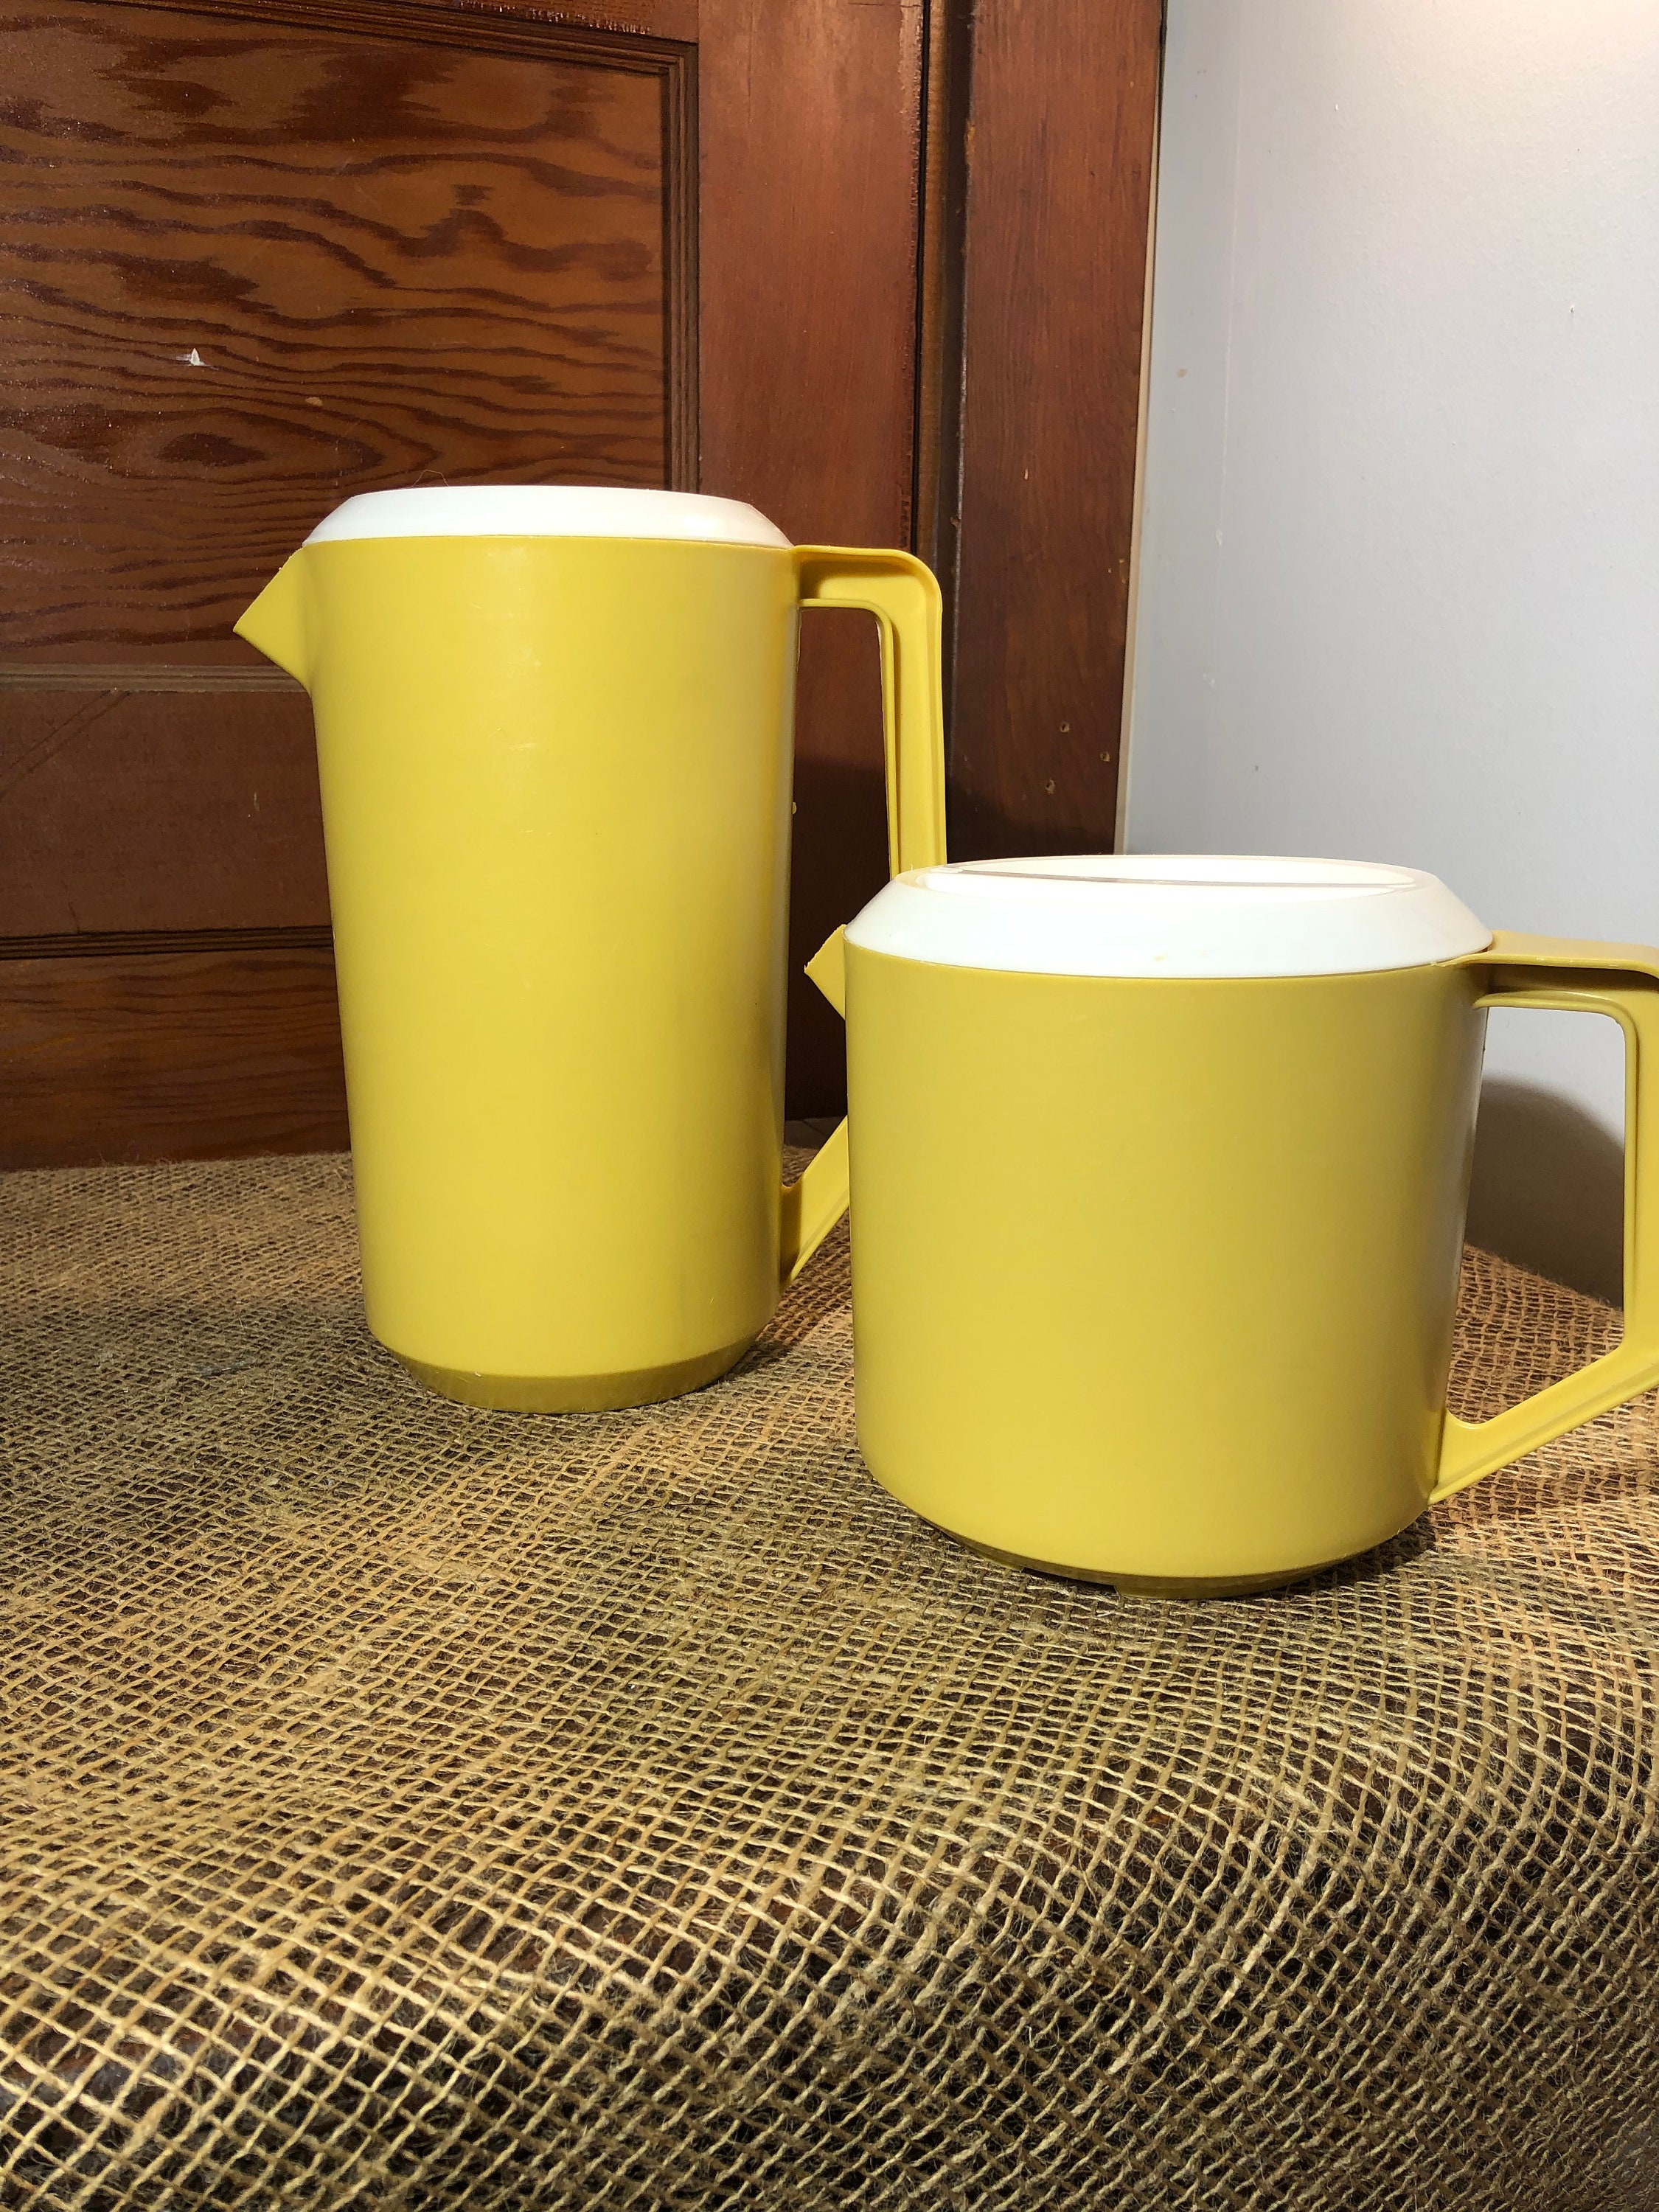 Vintage 1970s Rubbermaid Juice/water Jugs Your Choice of Jug: Orange 1.42L,  Yellow 1.42L or Yellow 2.25L Collectible Gift Idea 